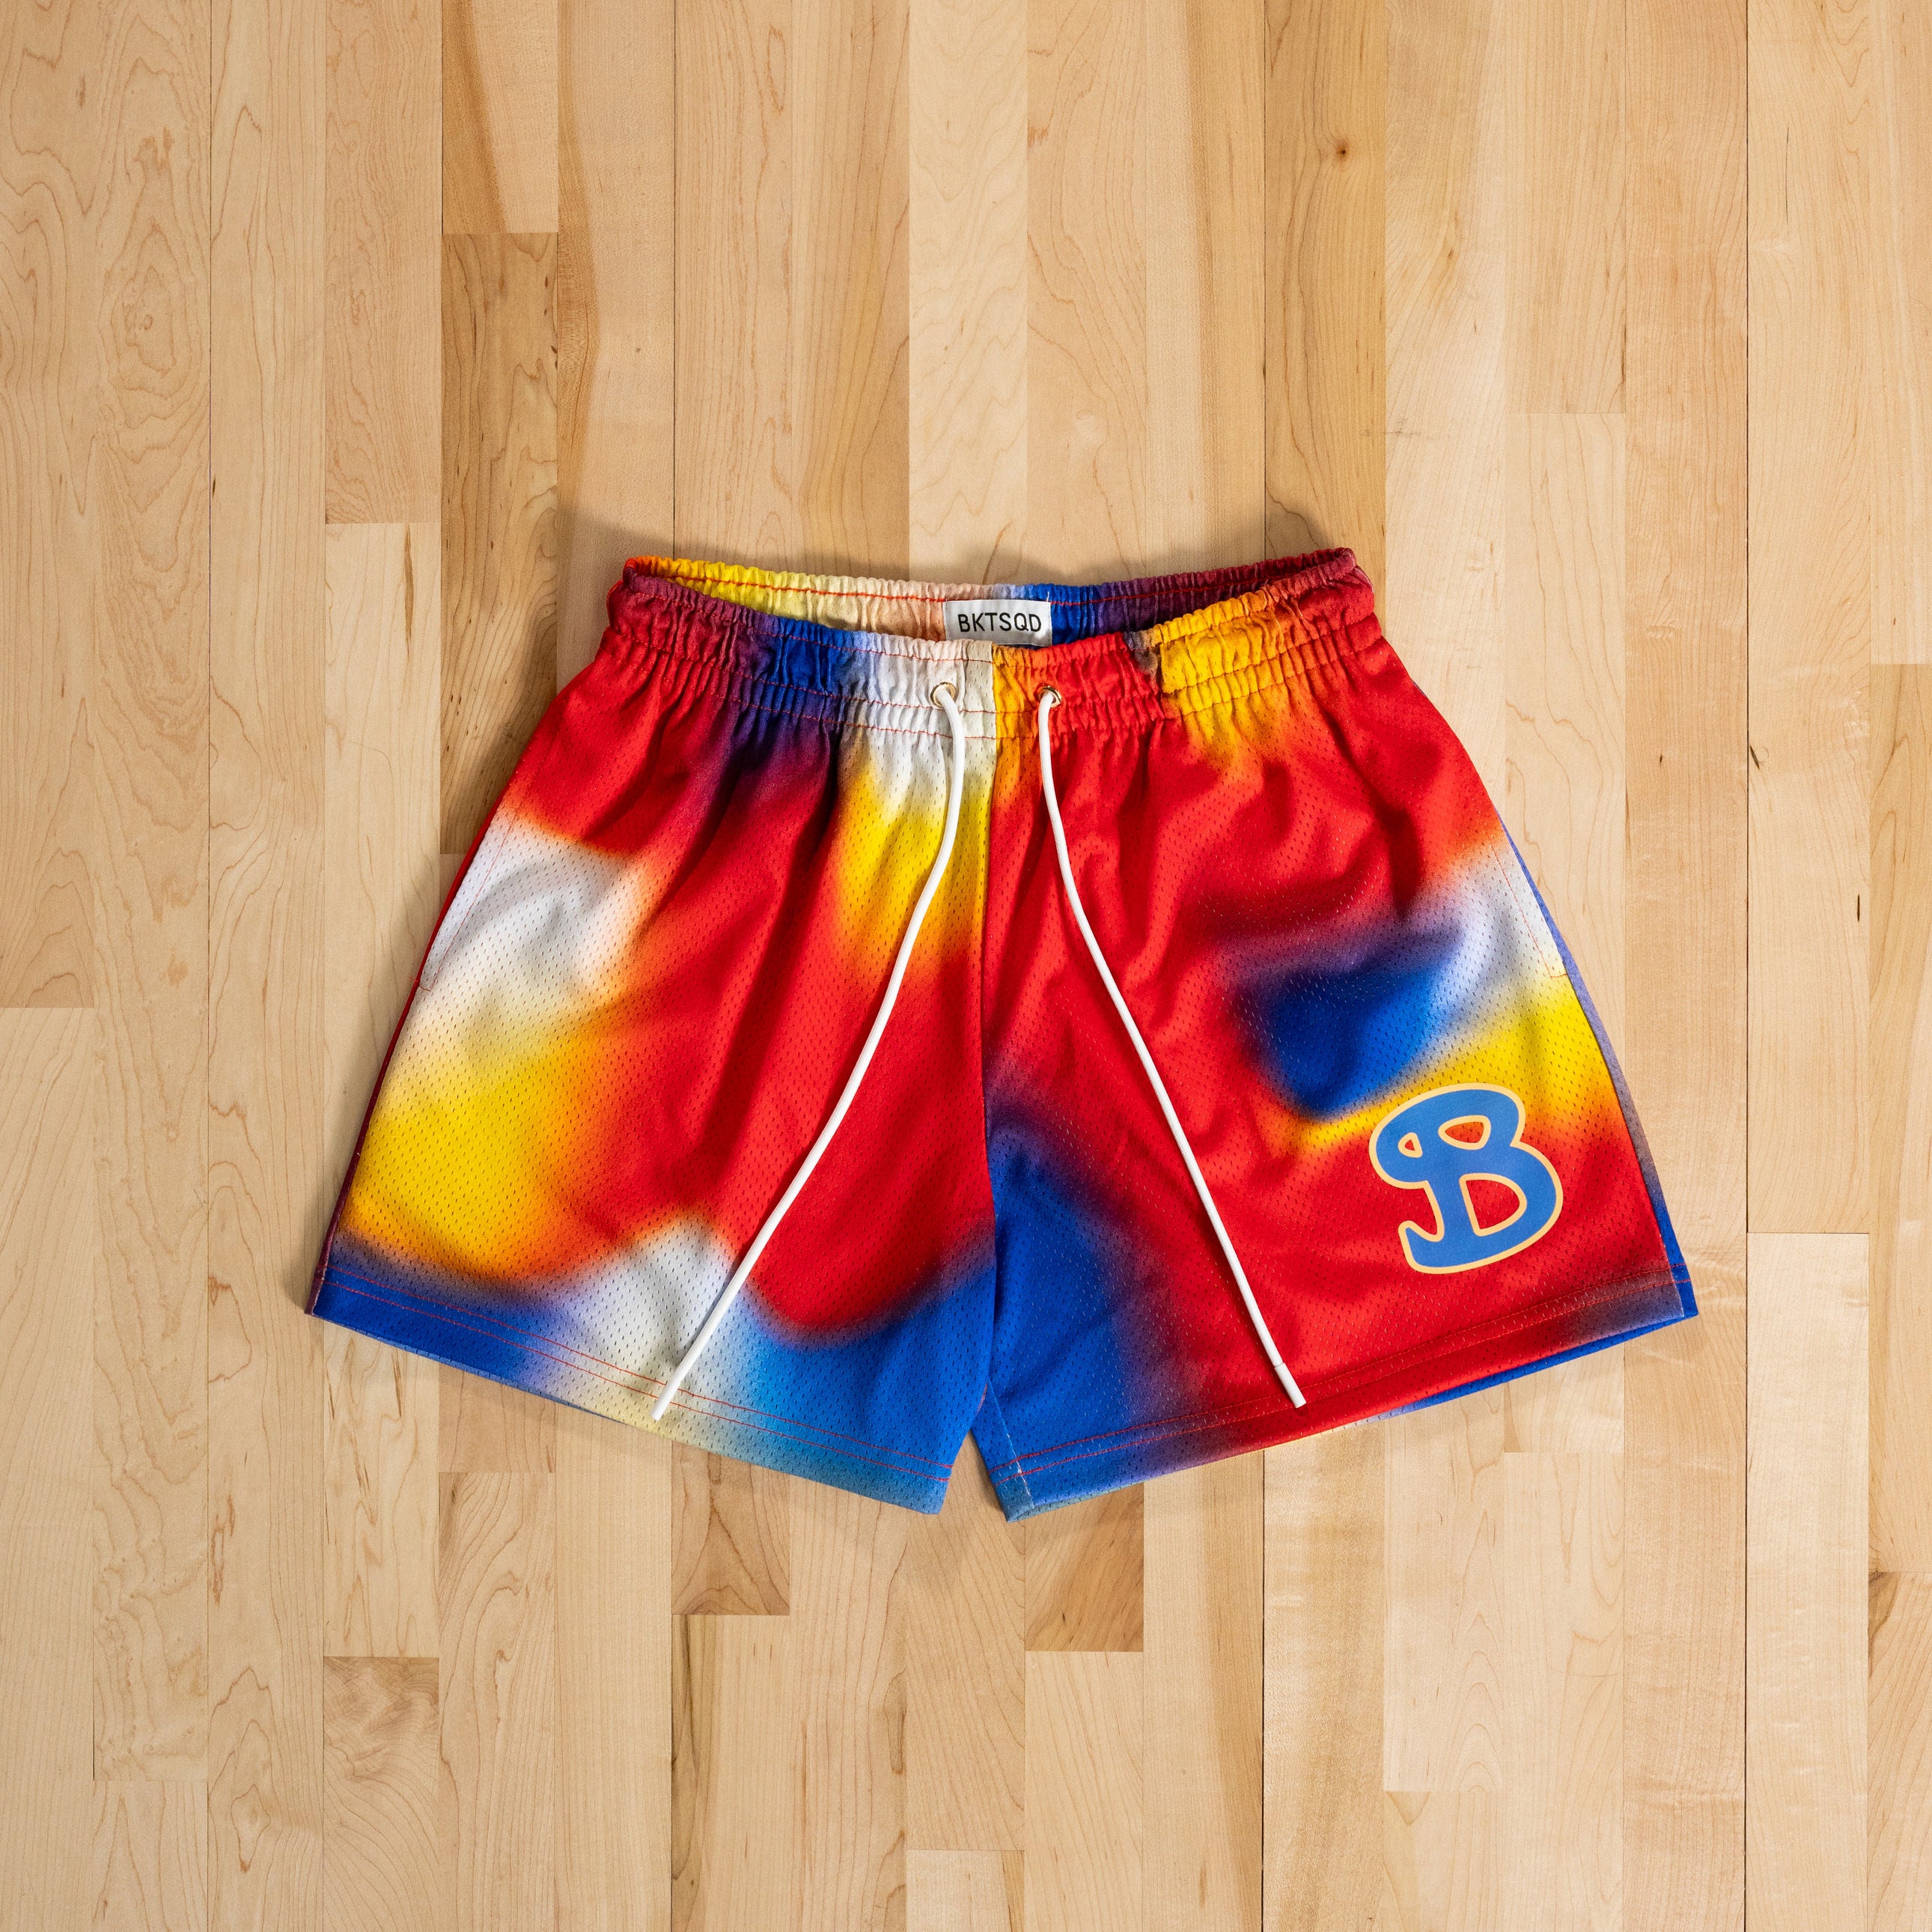 MARCH SLAM ADULT SHORTS - BLUE, RED, YELLOW